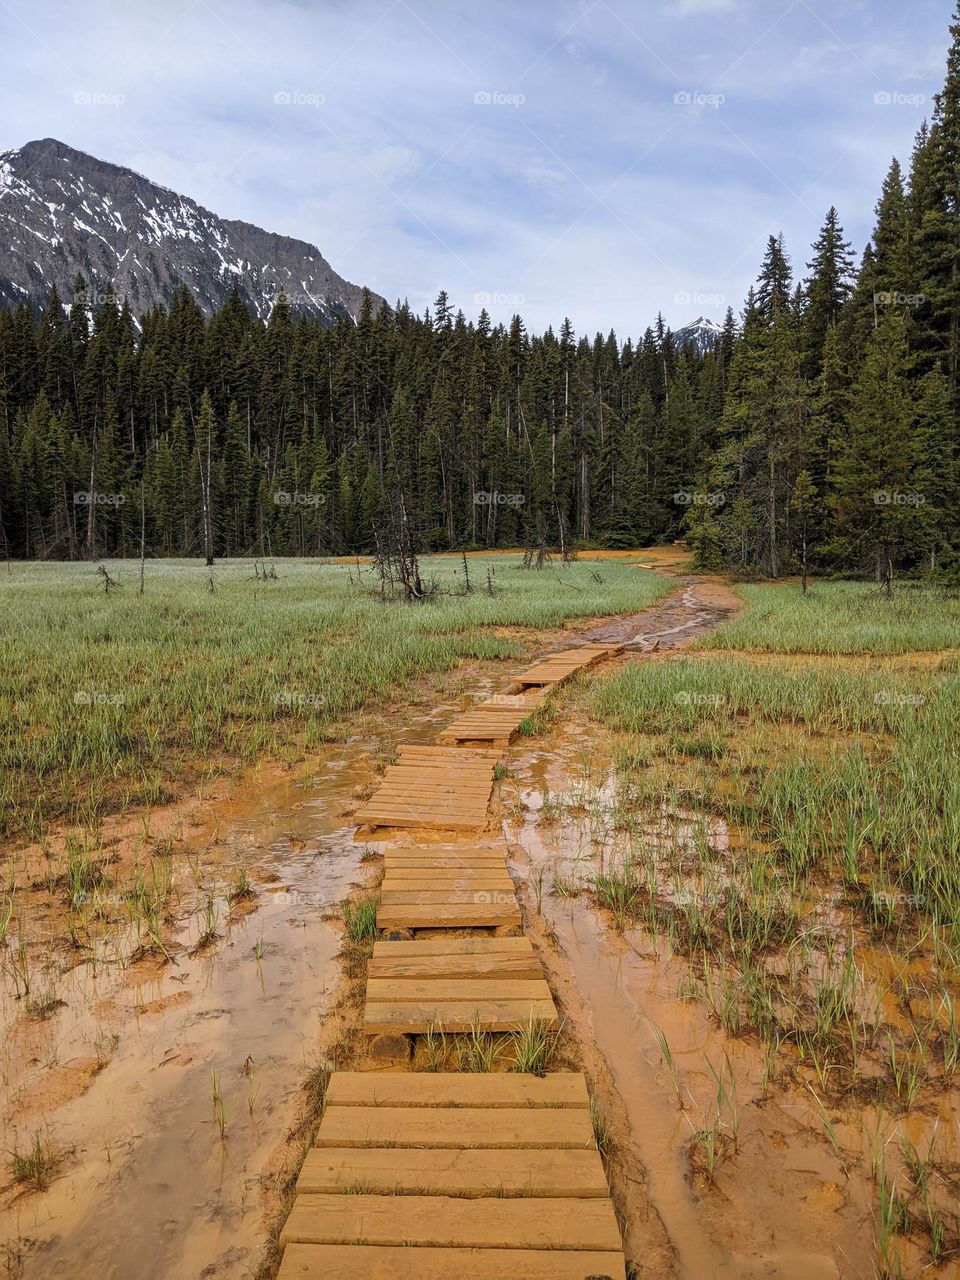 creative boardwalk at marble canyon in Washington state to provide a comfortable way to cross the valley